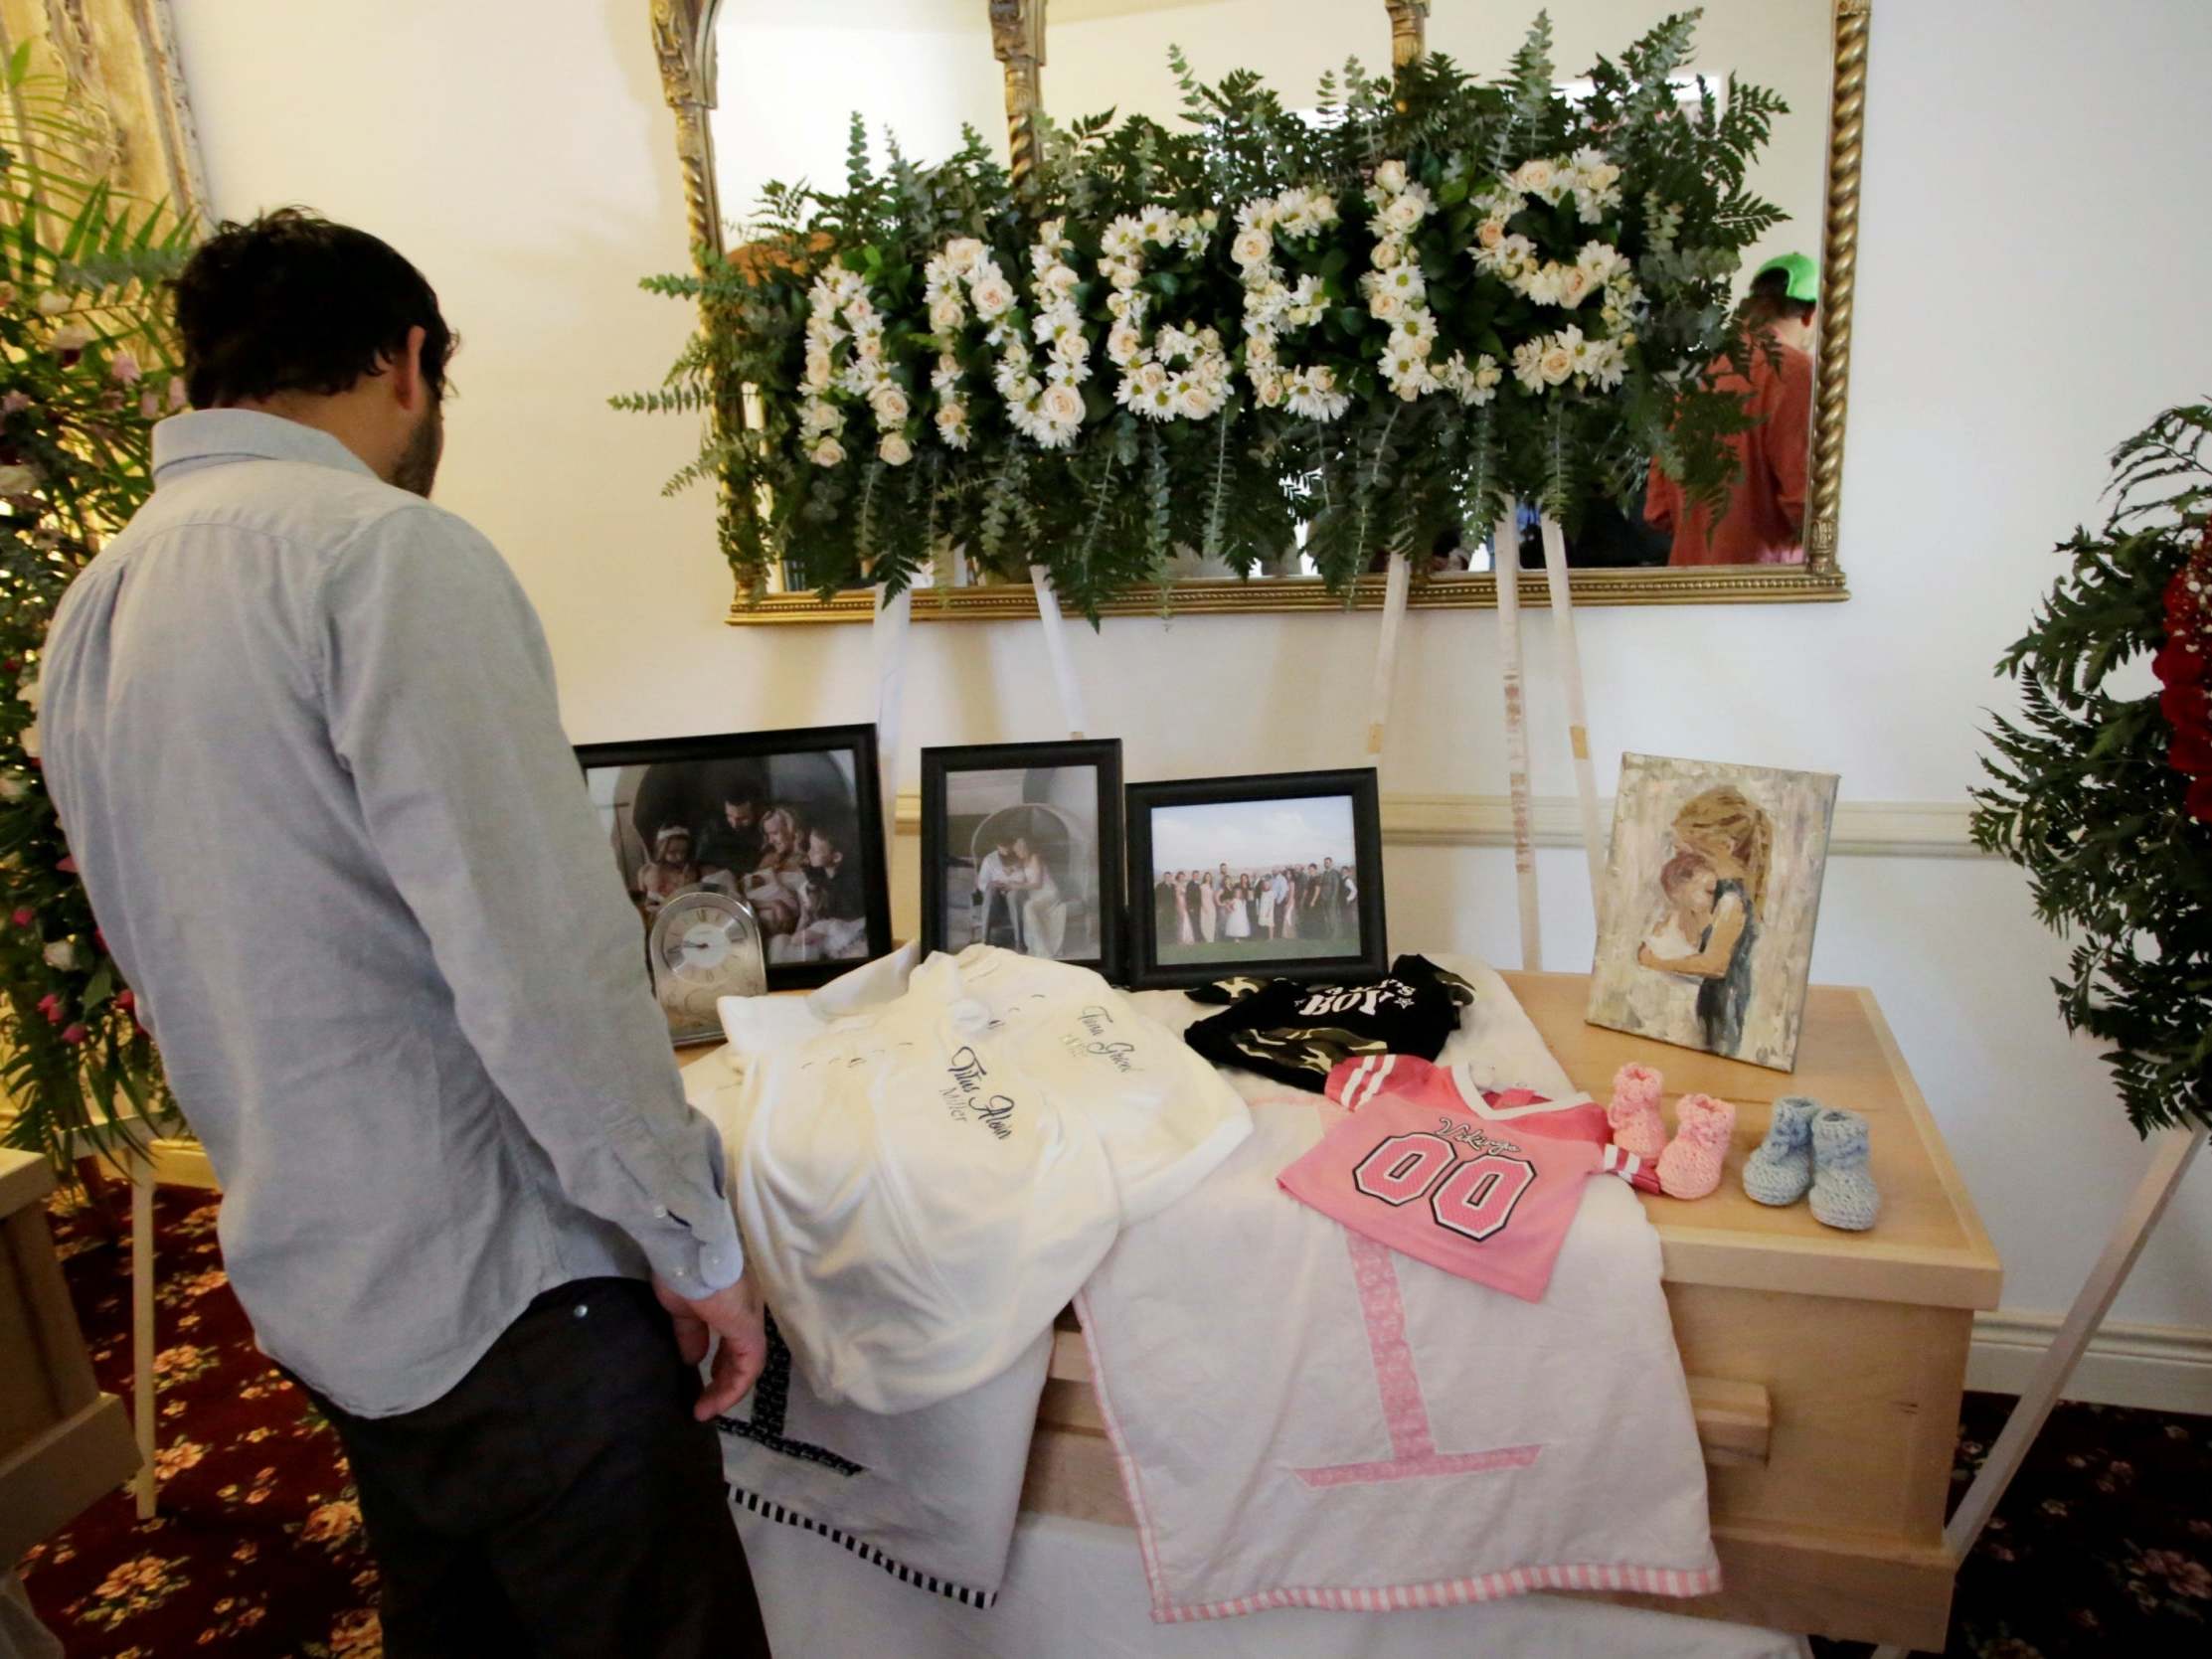 A person observes framed photographs of Rhonita Maria Miller and her four children, members of the Mexican-American Mormon community killed by unknown assailants, before her funeral in La Mora, in La Mora, Sonora state, Mexico 7 November 2019